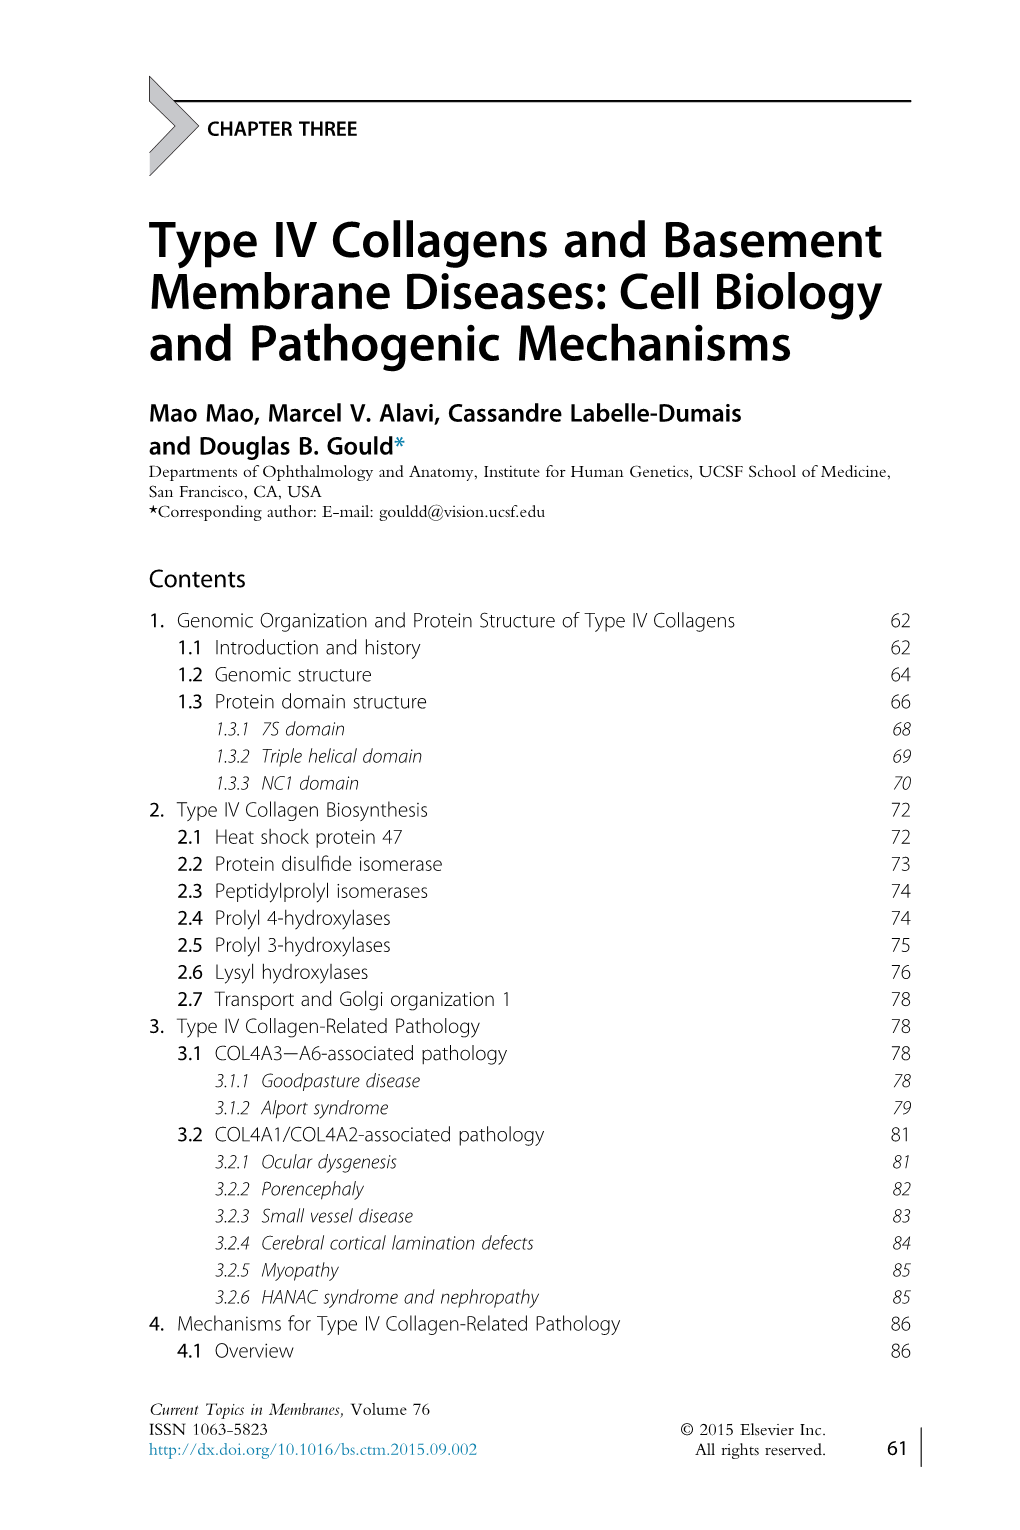 Type IV Collagens and Basement Membrane Diseases: Cell Biology and Pathogenic Mechanisms